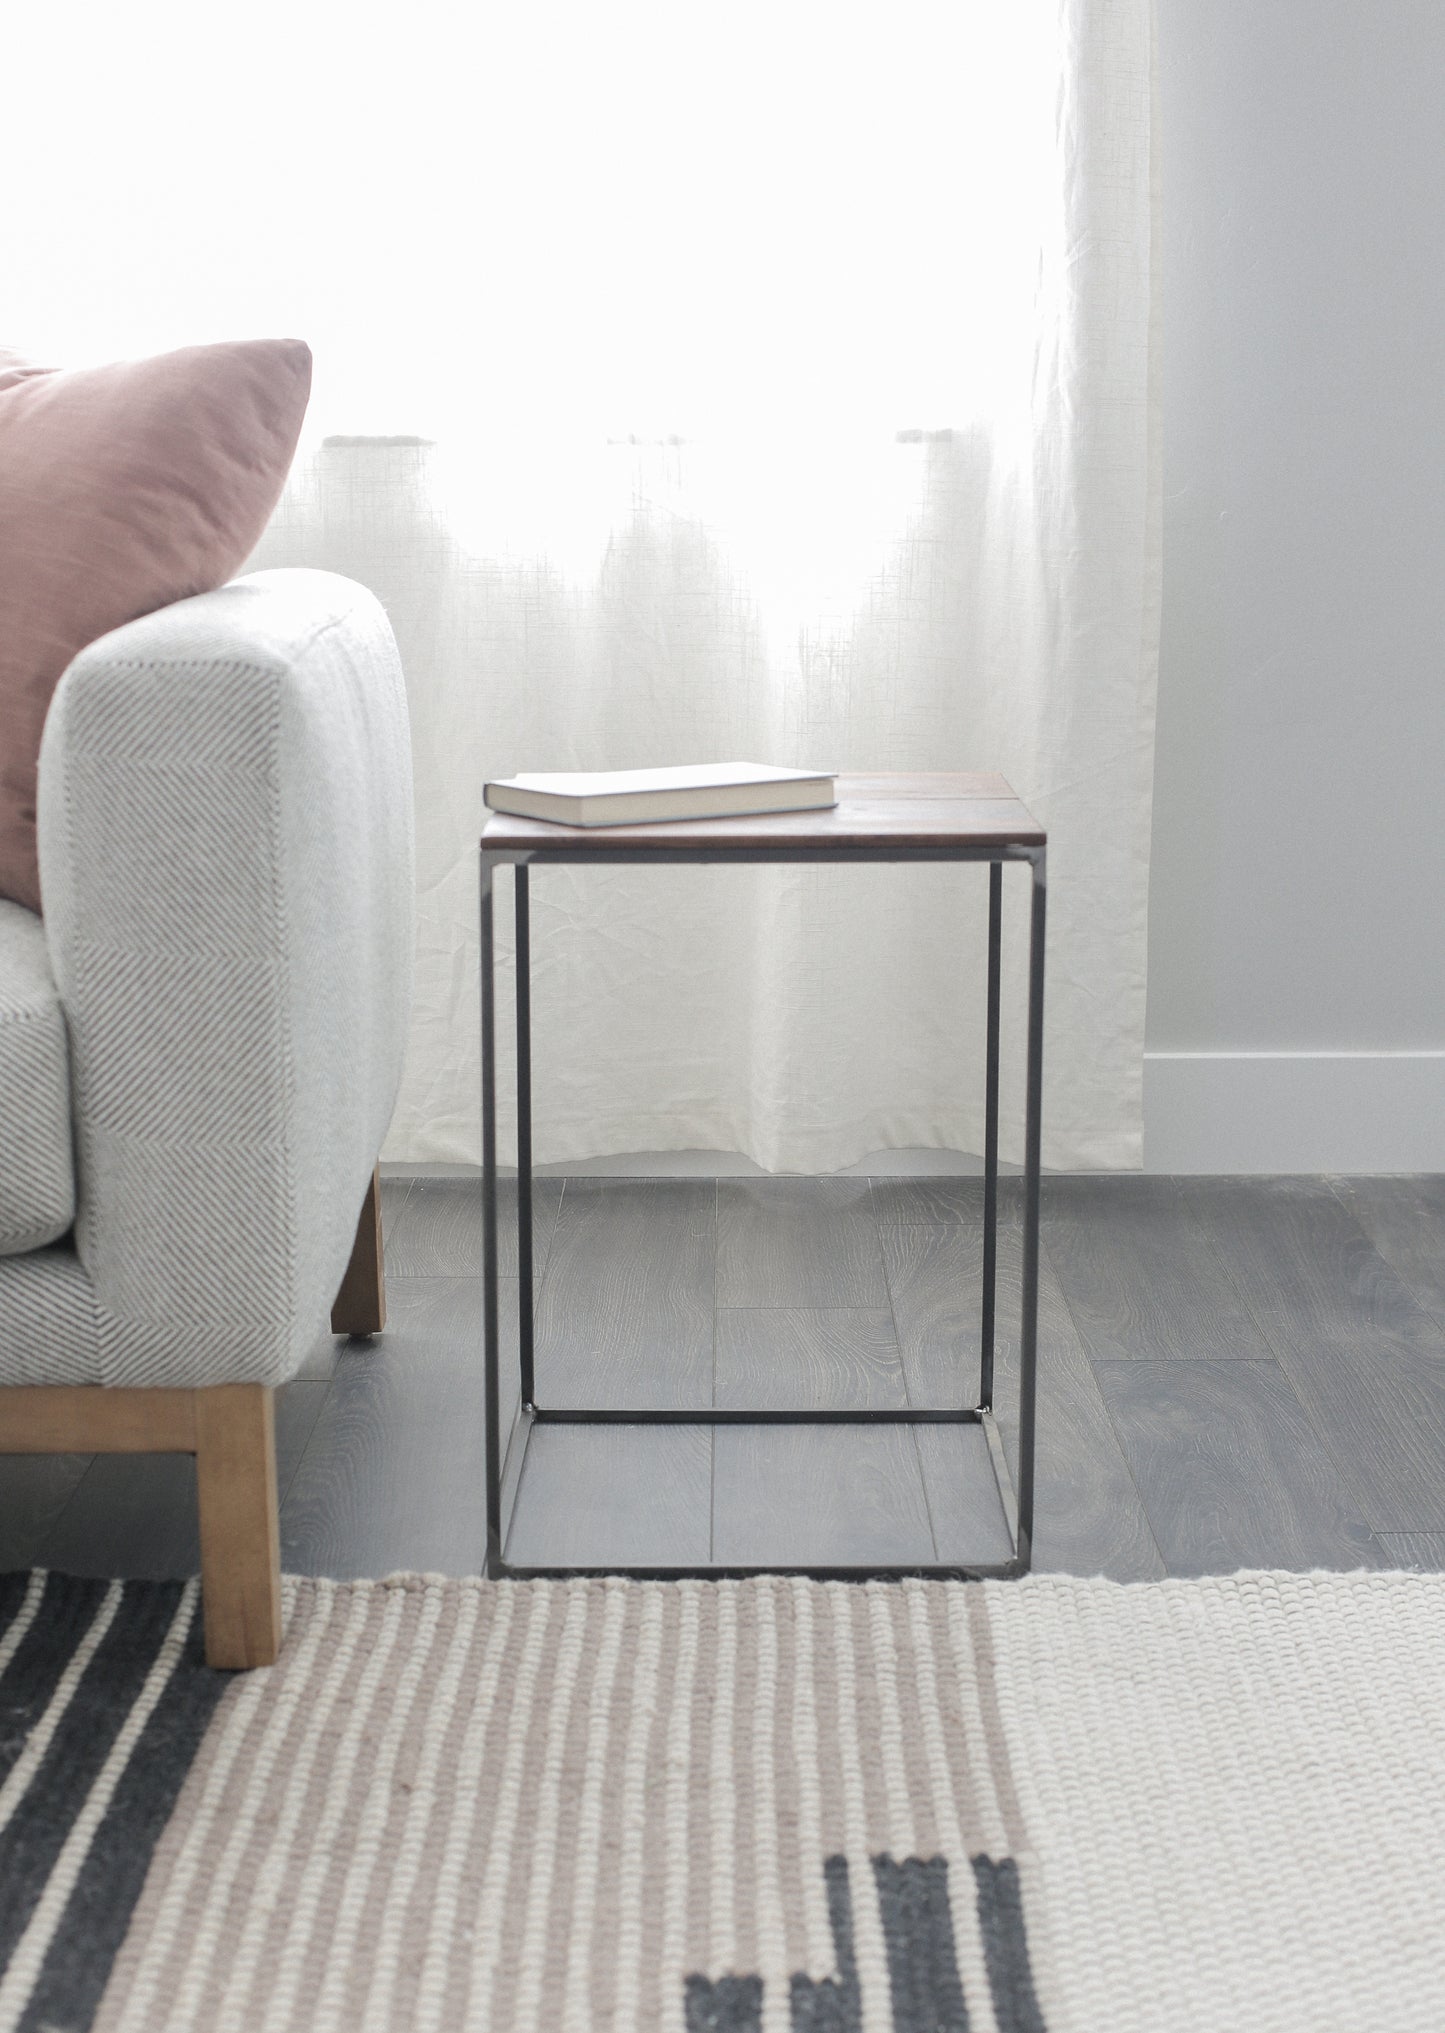 PRISM Square End Table